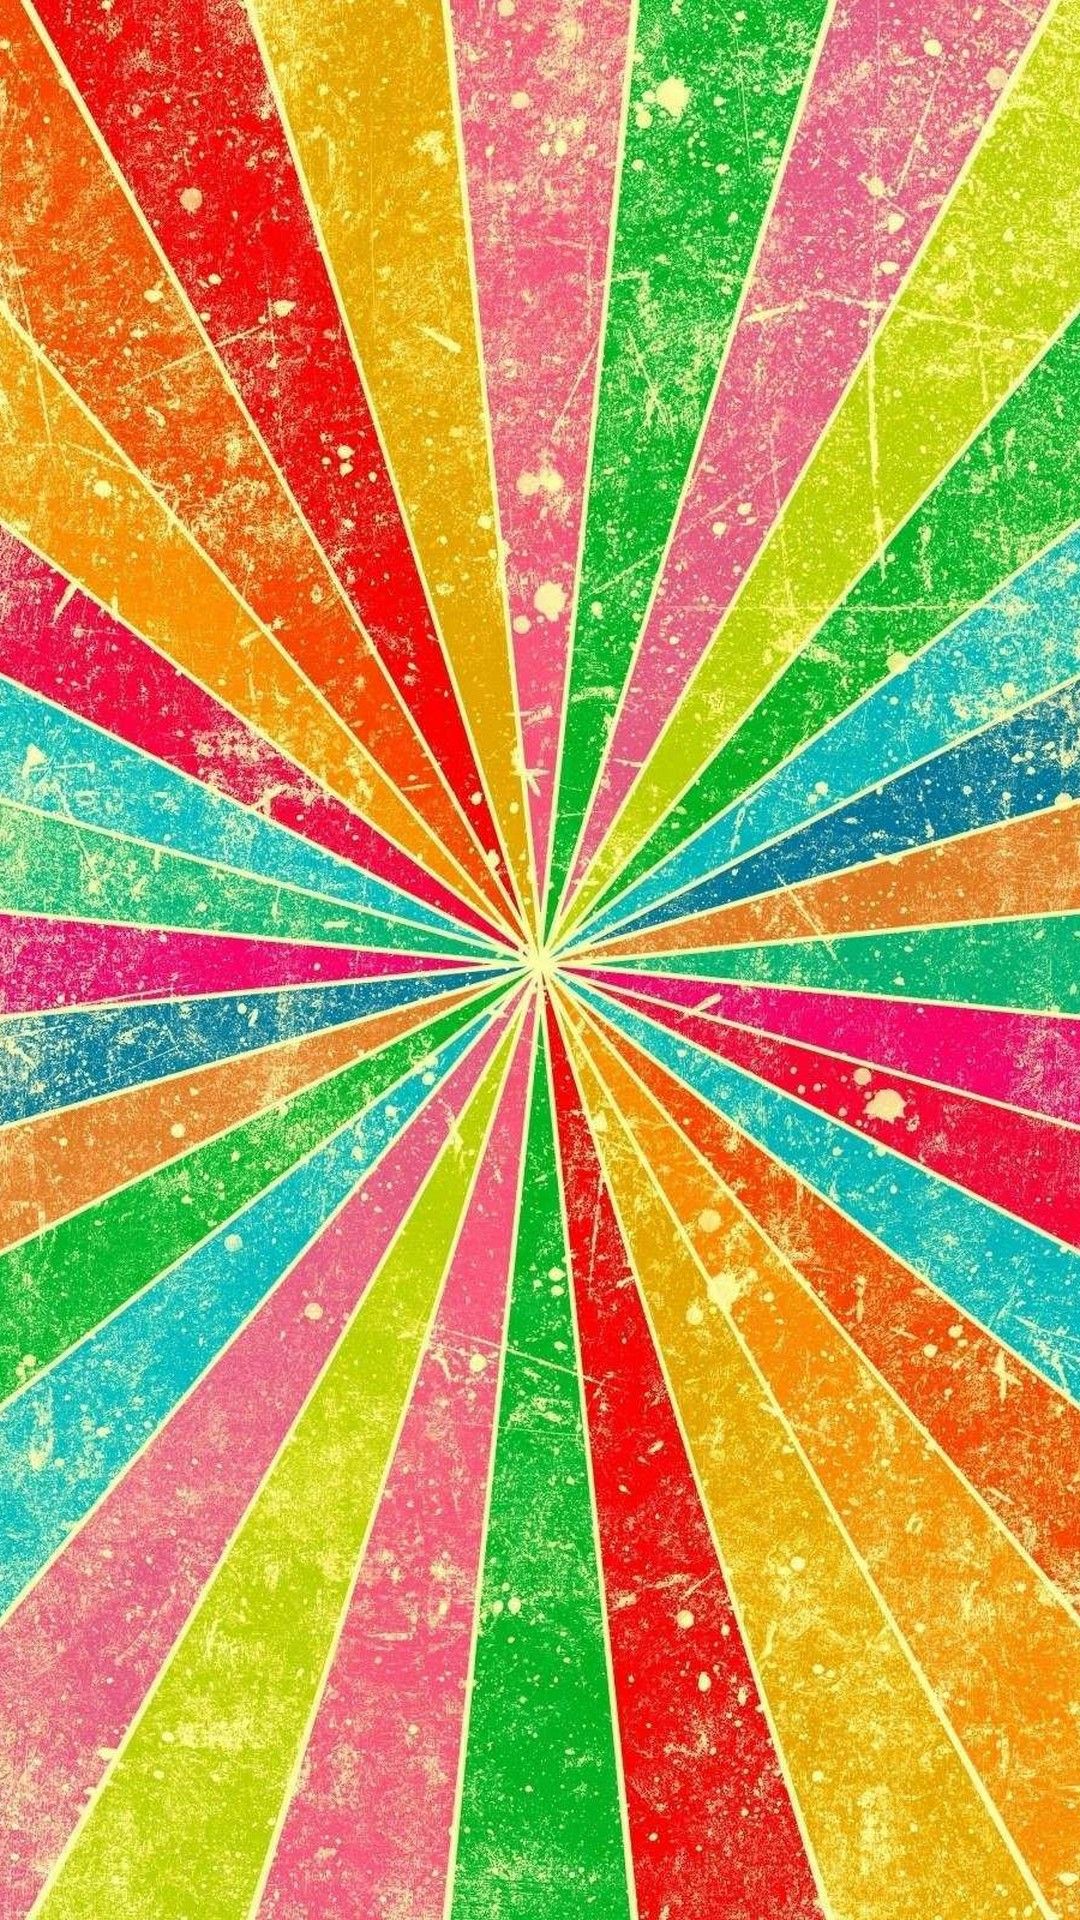 Rainbow Colors Wallpaper Android With Image Resolution Wallpaper Rainbow Colors For iPhone